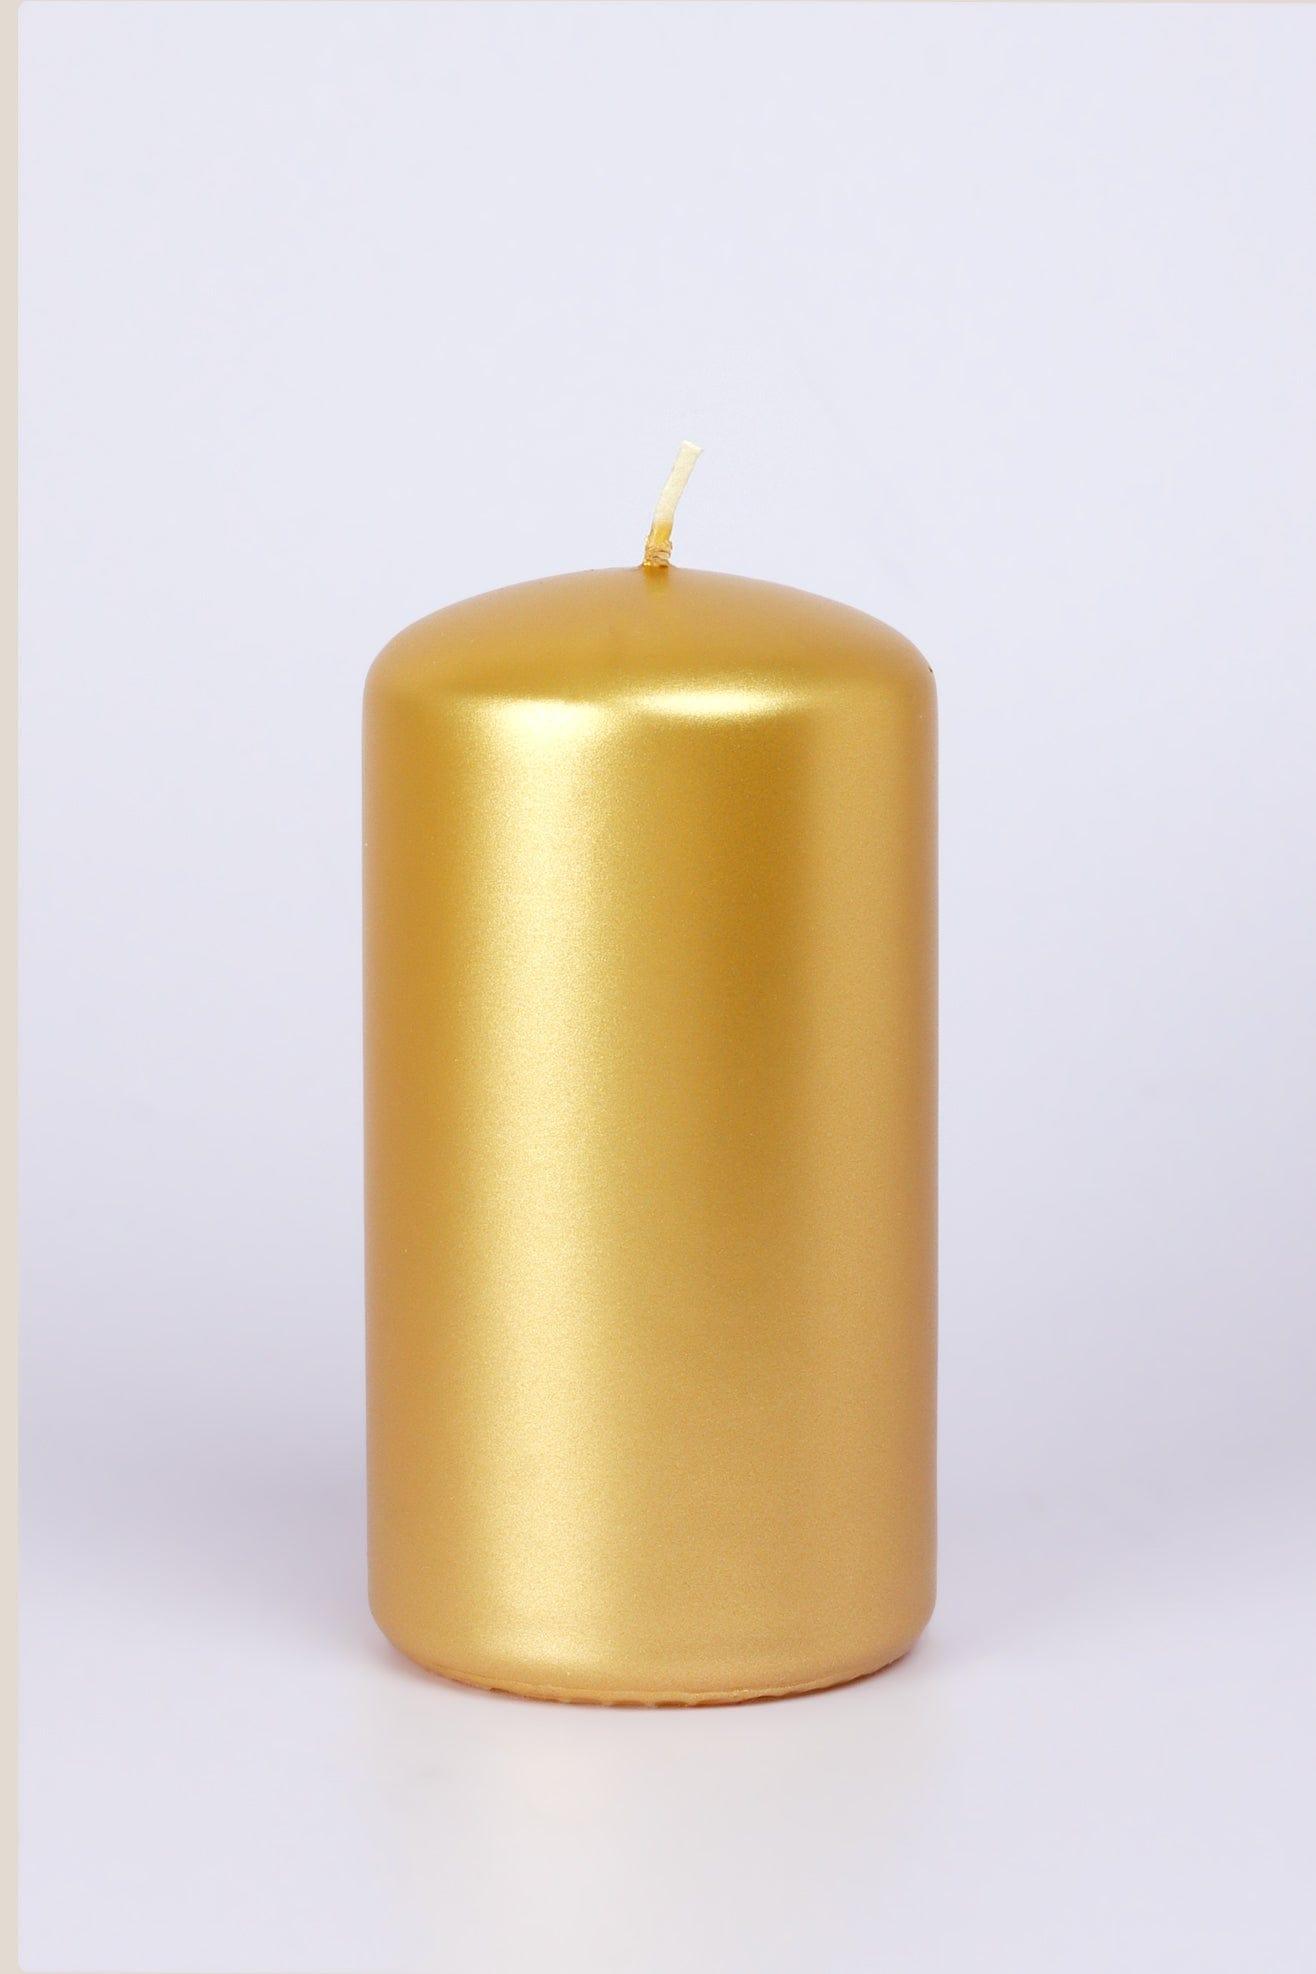 G Decor Candles & Candle Holders Gold / Small Pillar Grace Gold Varnished Shimmer Metallic Shine Pillar Candle